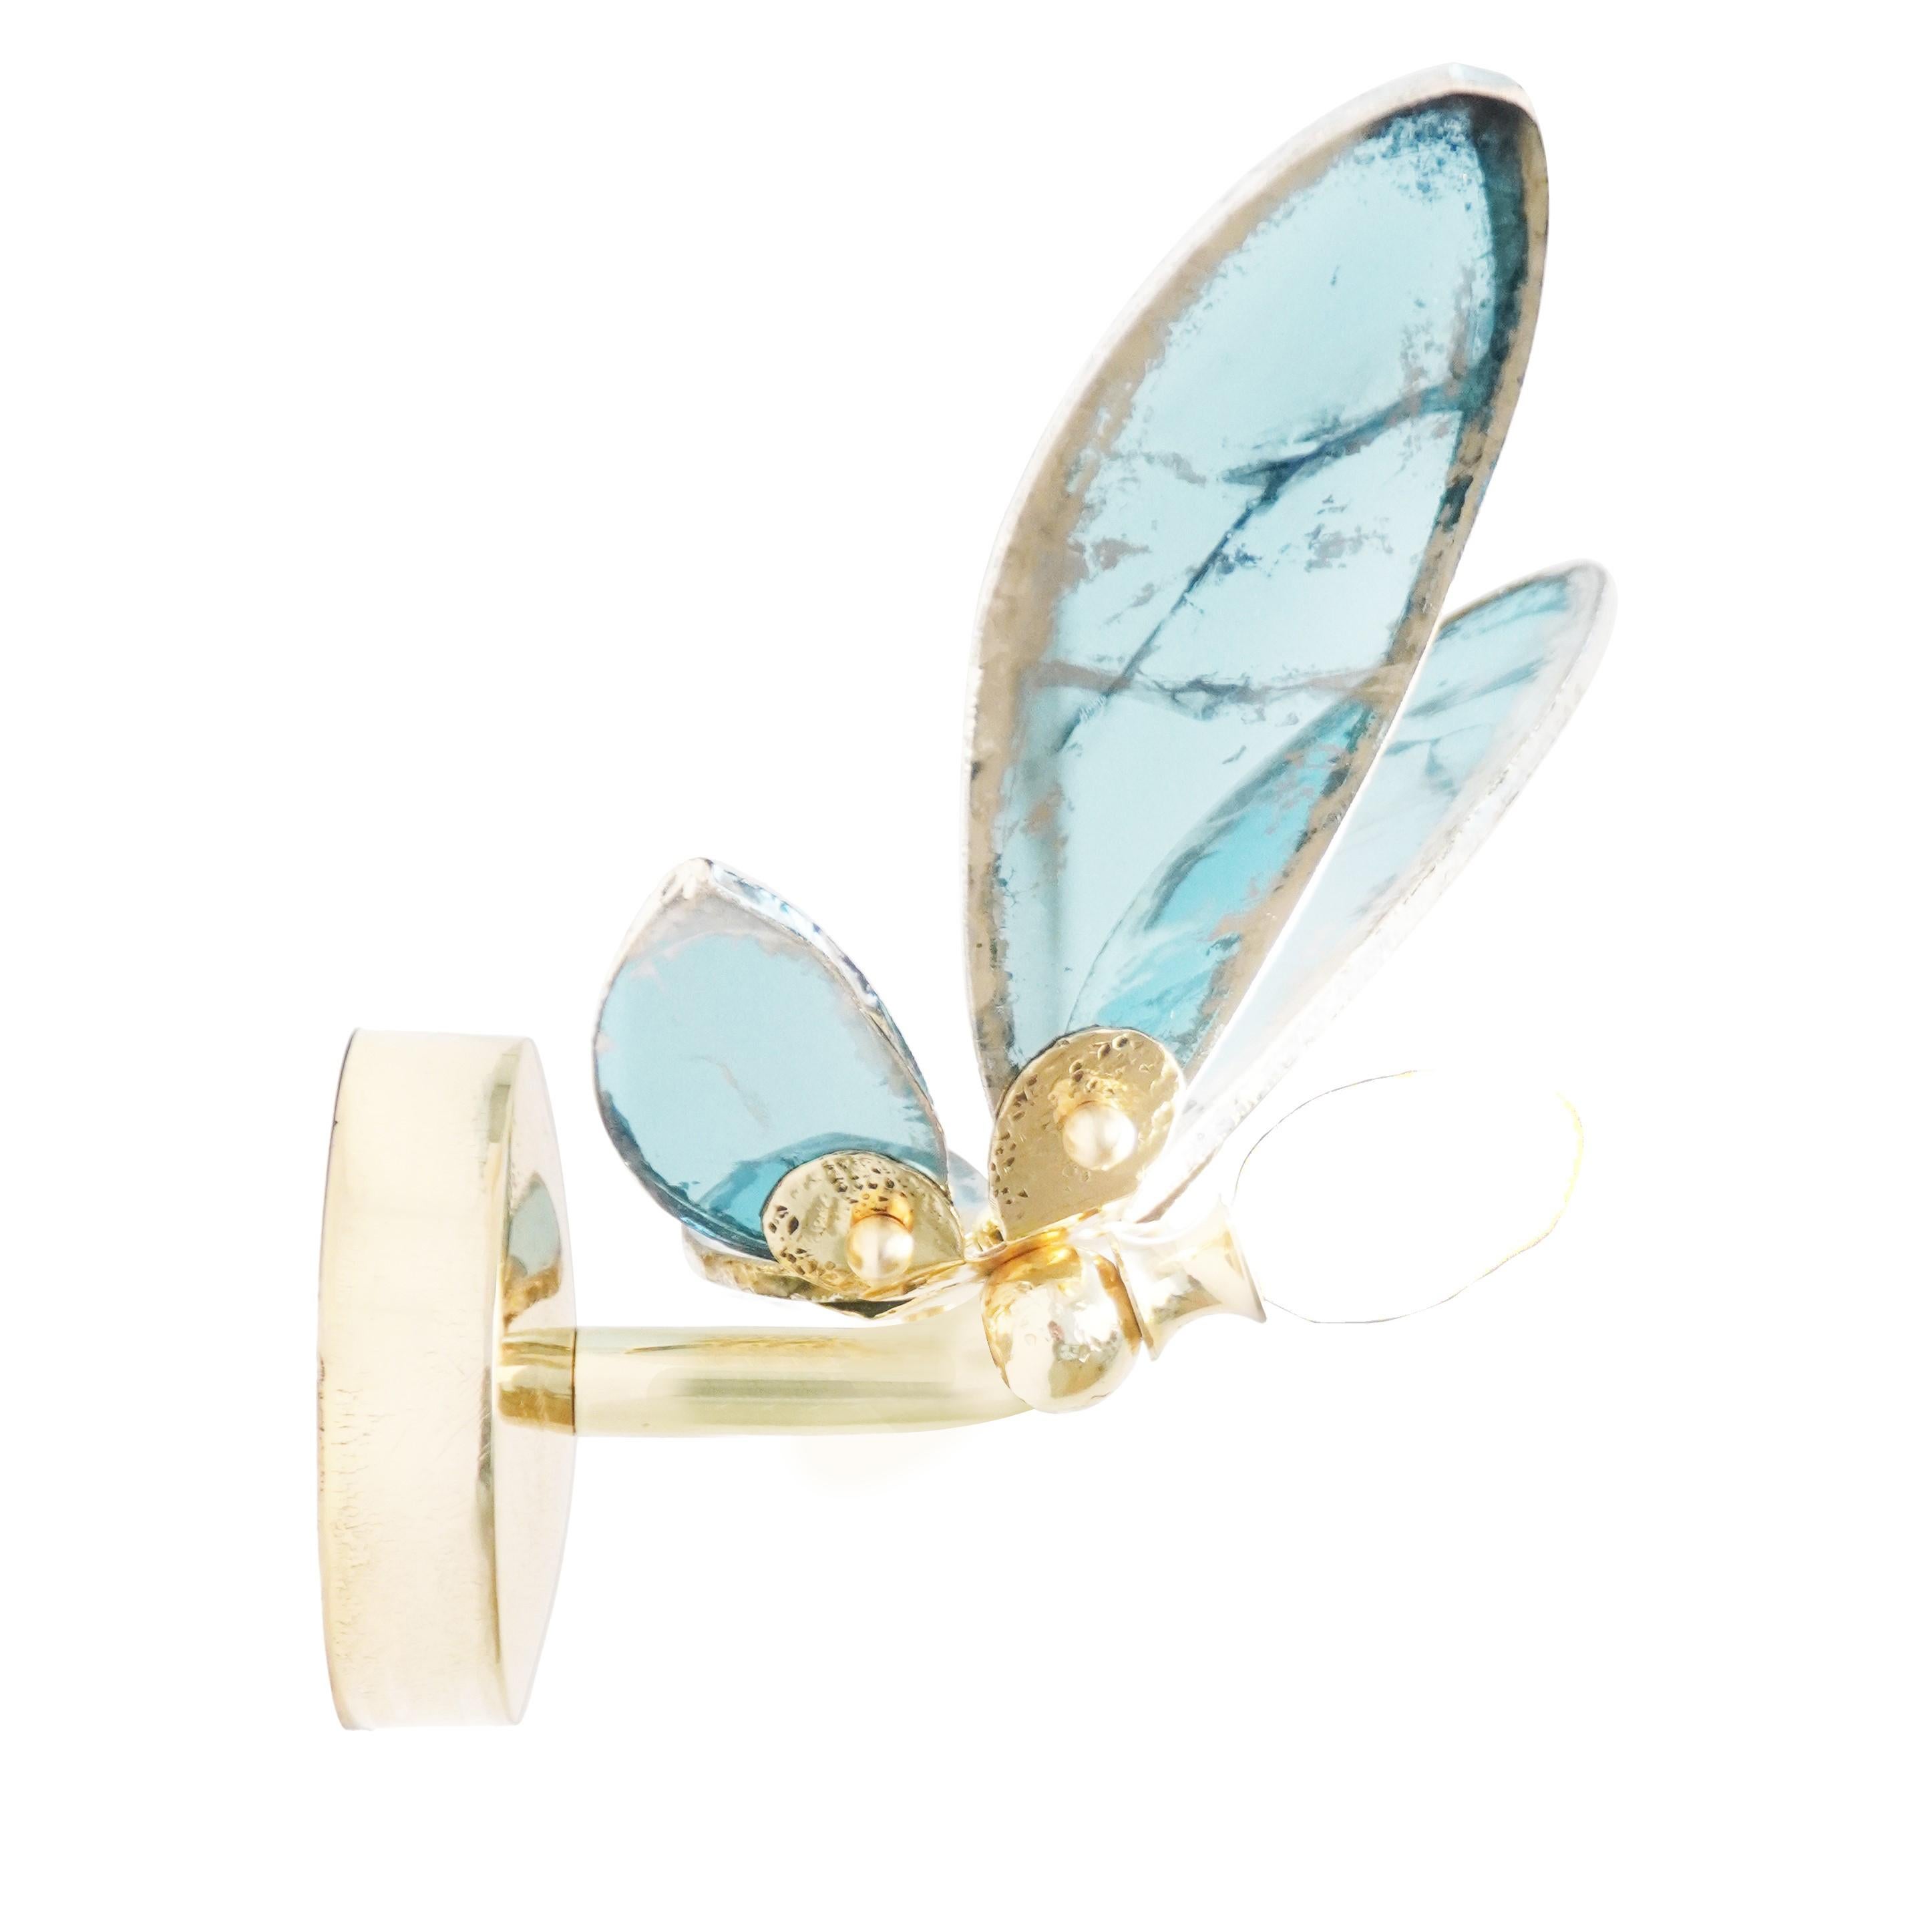 TRILLY the fairy wings of freedom

The House of the artisanal objects is create by combining form and function through unparalleled craftsmanship, Sabrina Landini has remained a steadfast proponent of living with luxury every day.

An ethereal